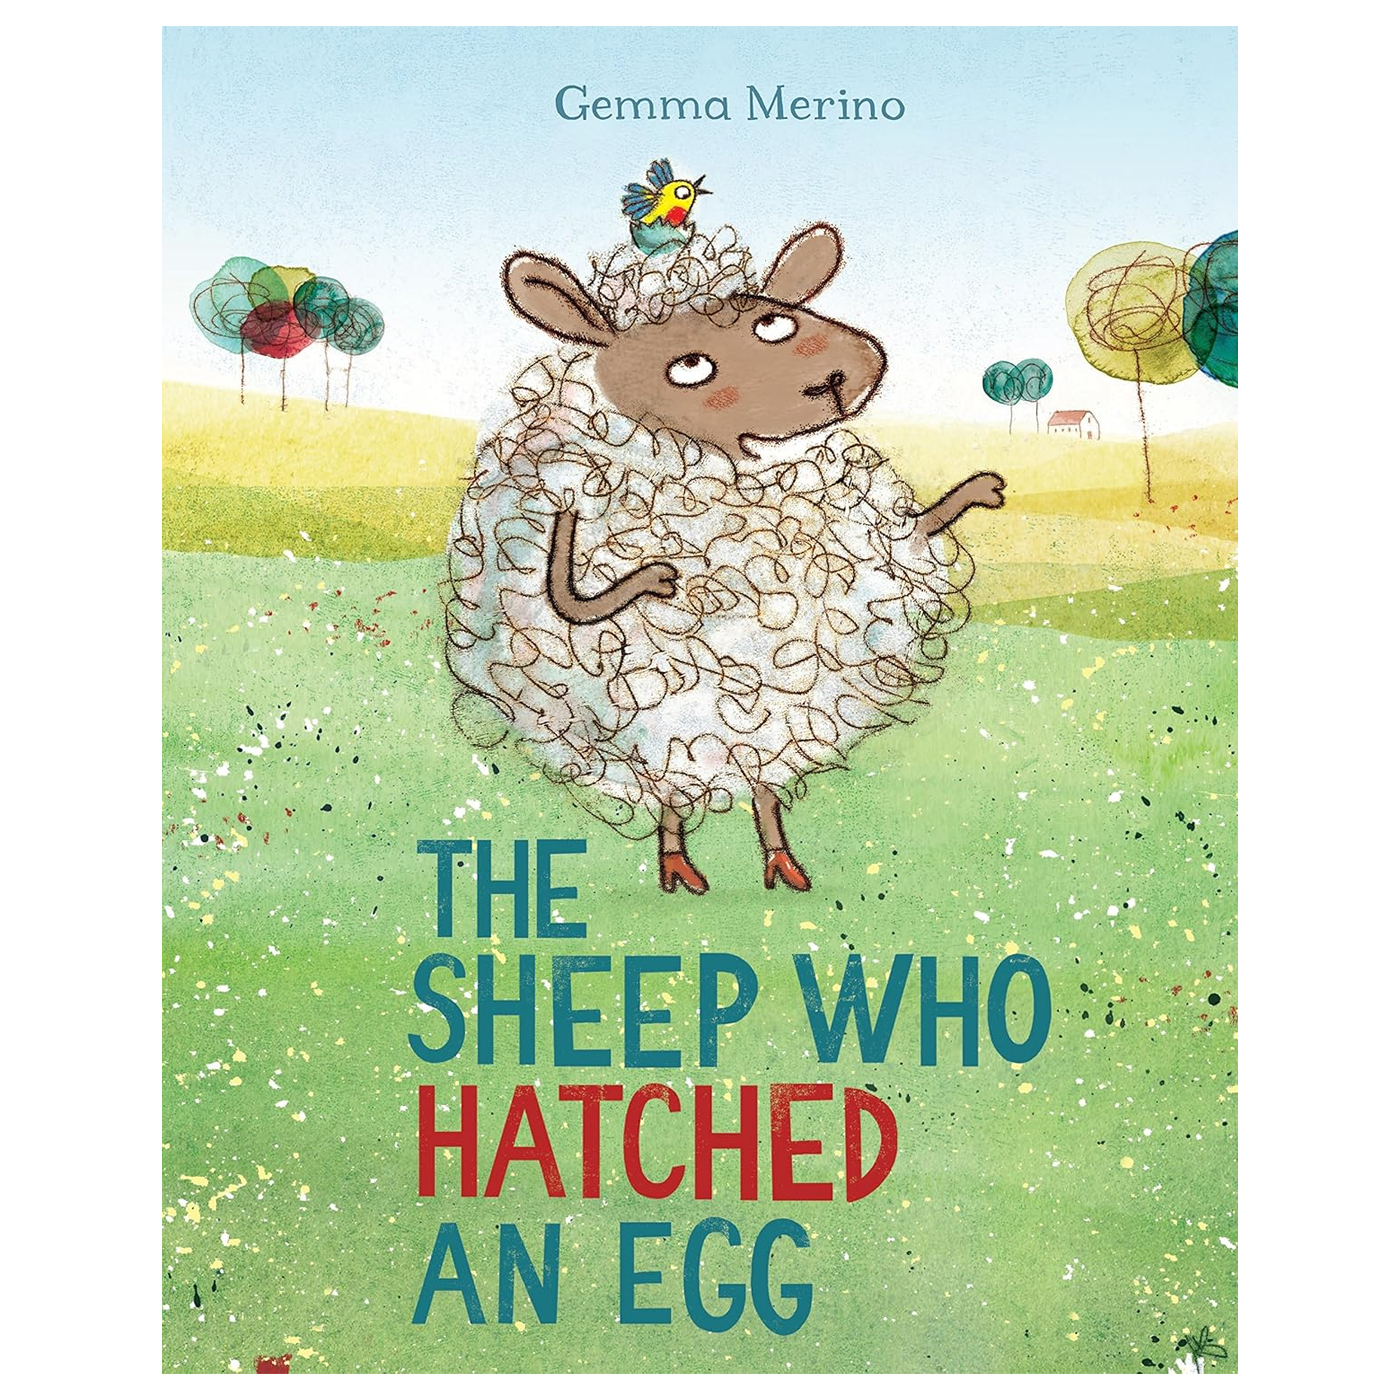  The Sheep Who Hatched An Egg